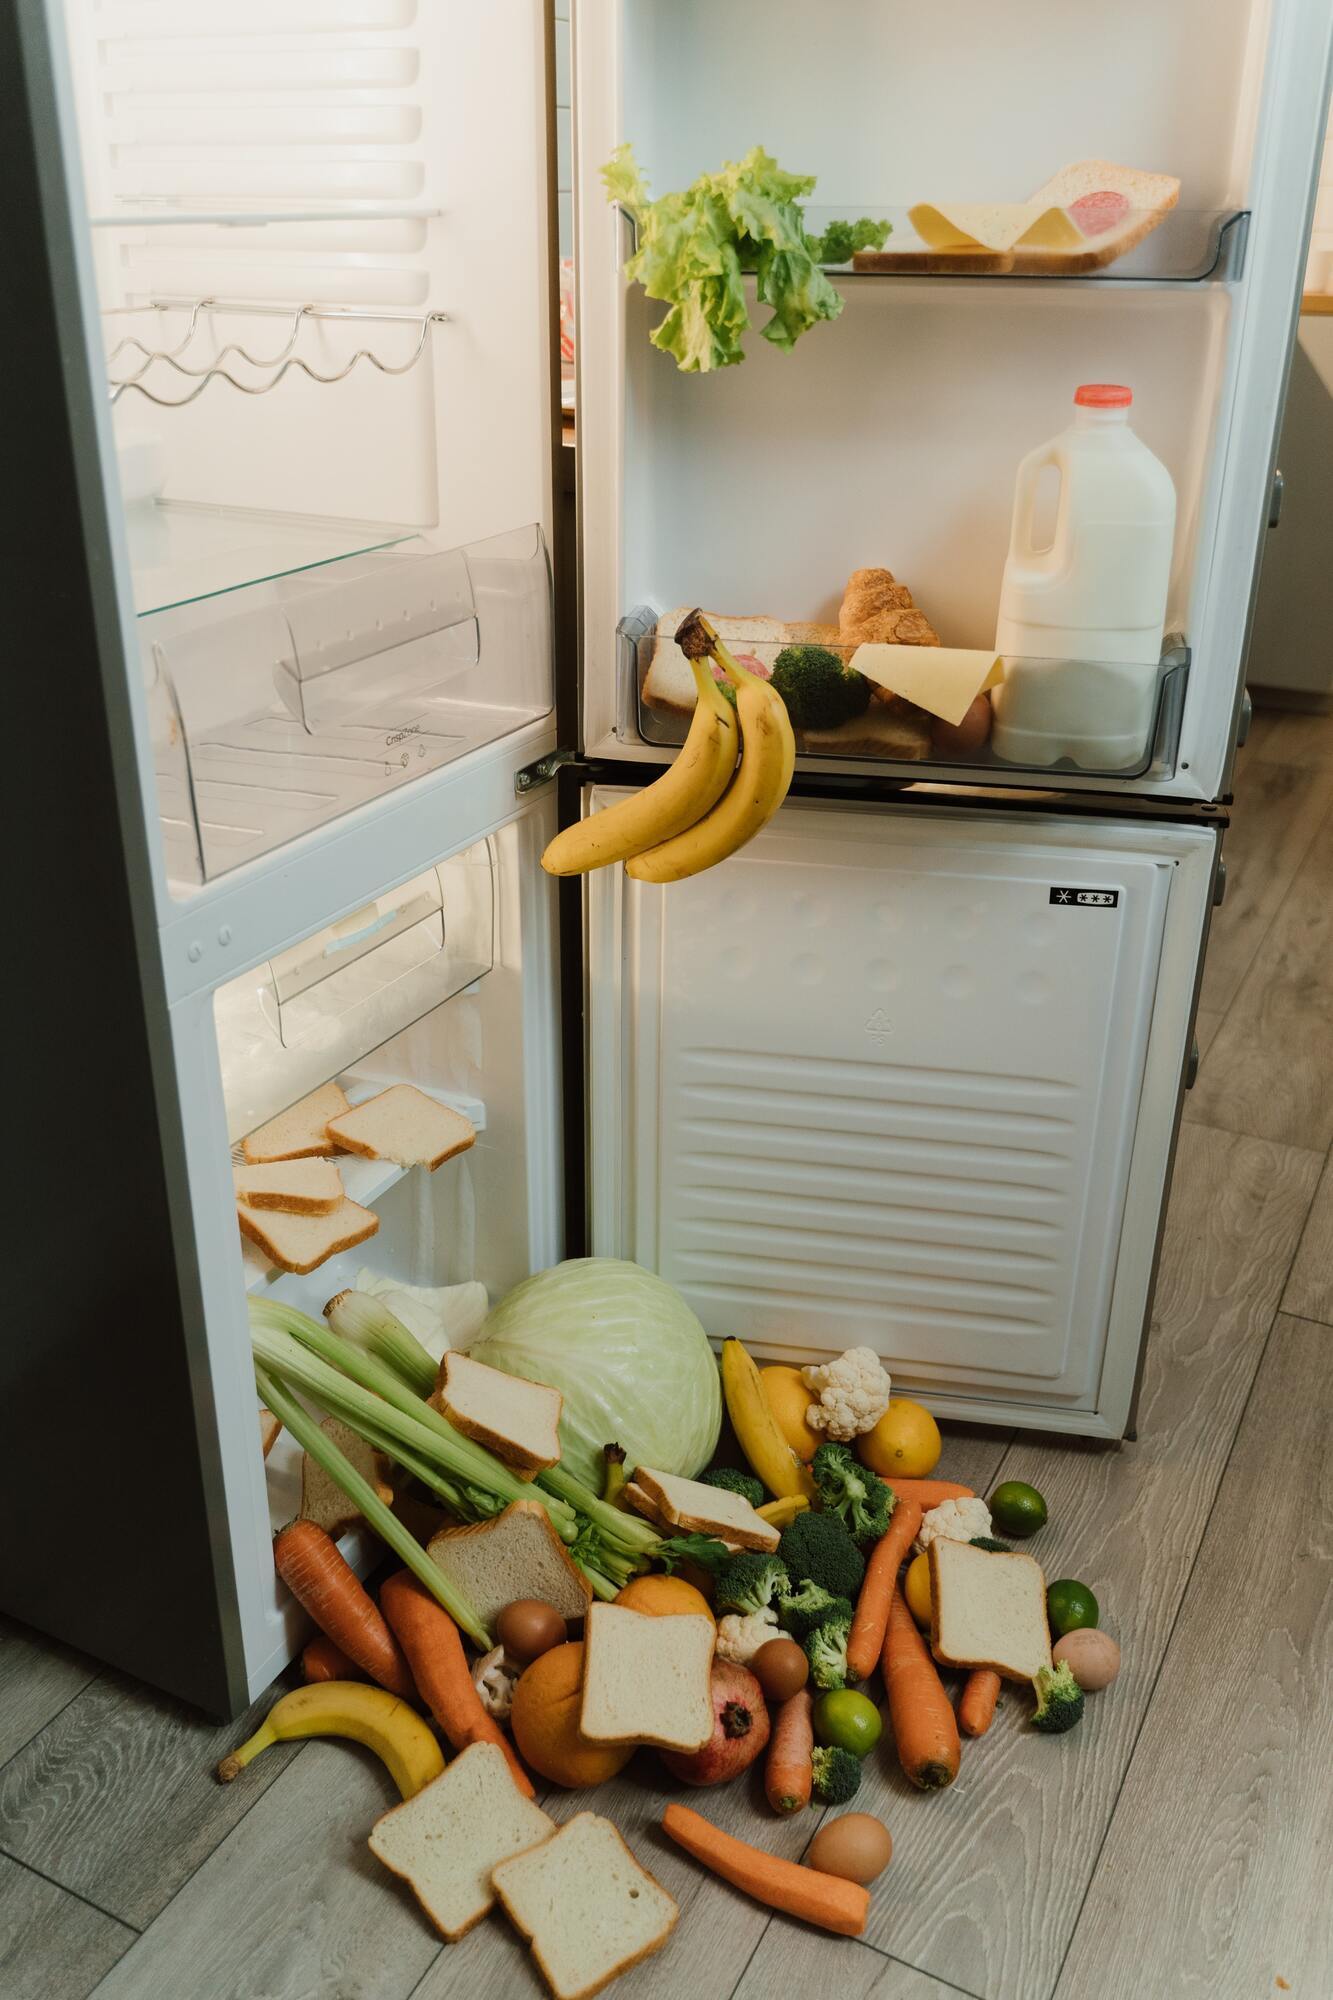 How to get rid of an unpleasant smell from the refrigerator